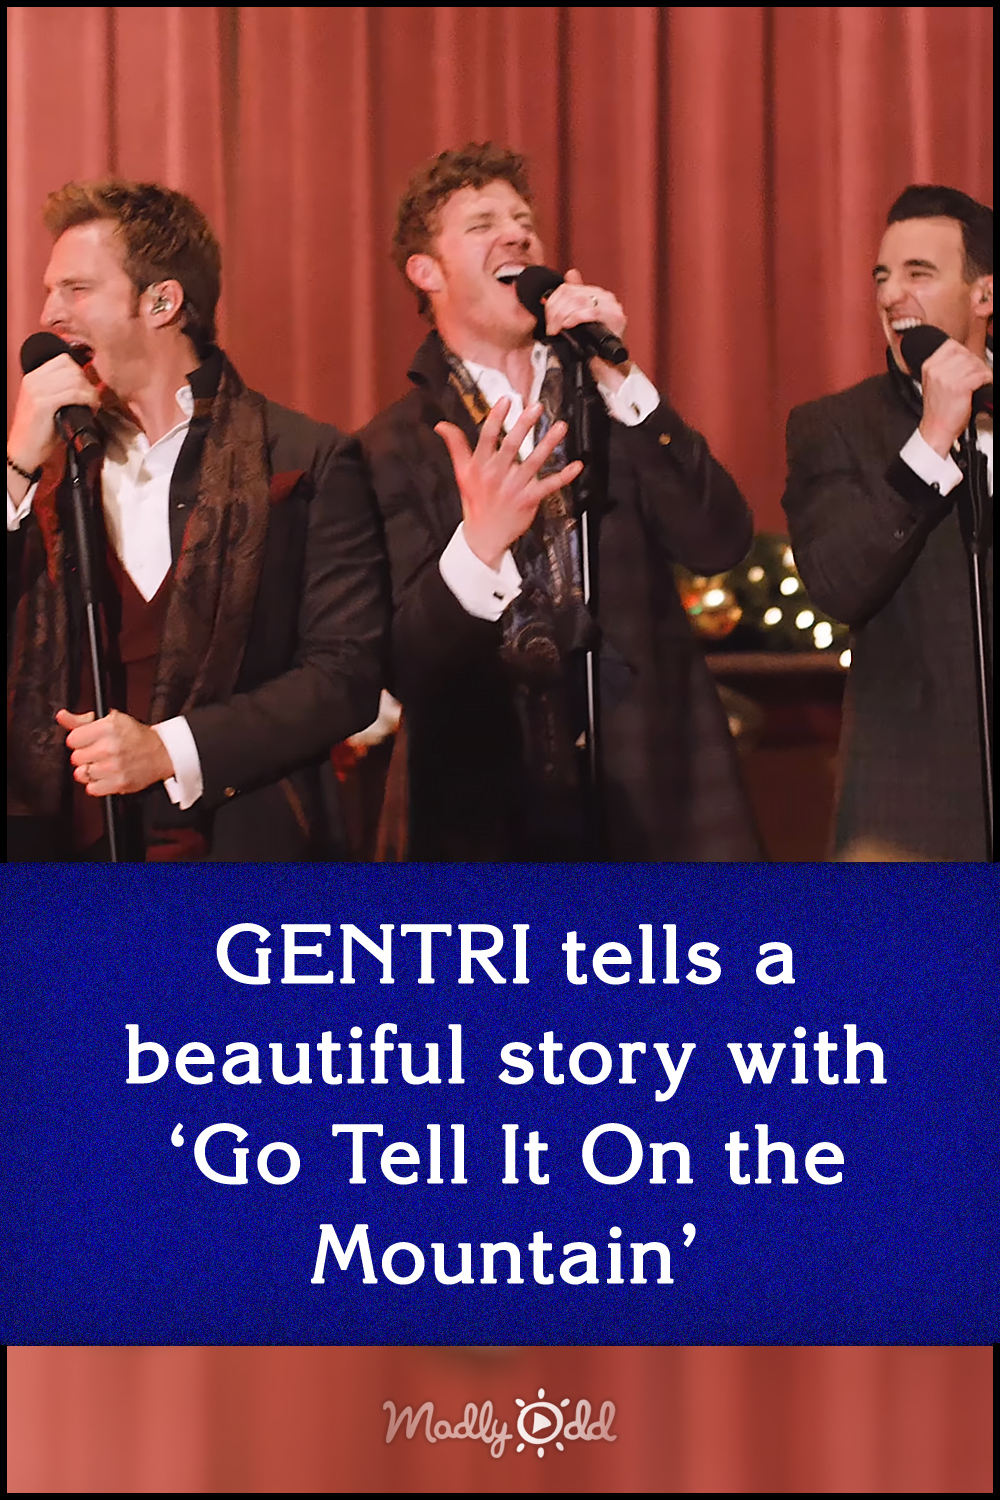 GENTRI tells a beautiful story with ‘Go Tell It On the Mountain’